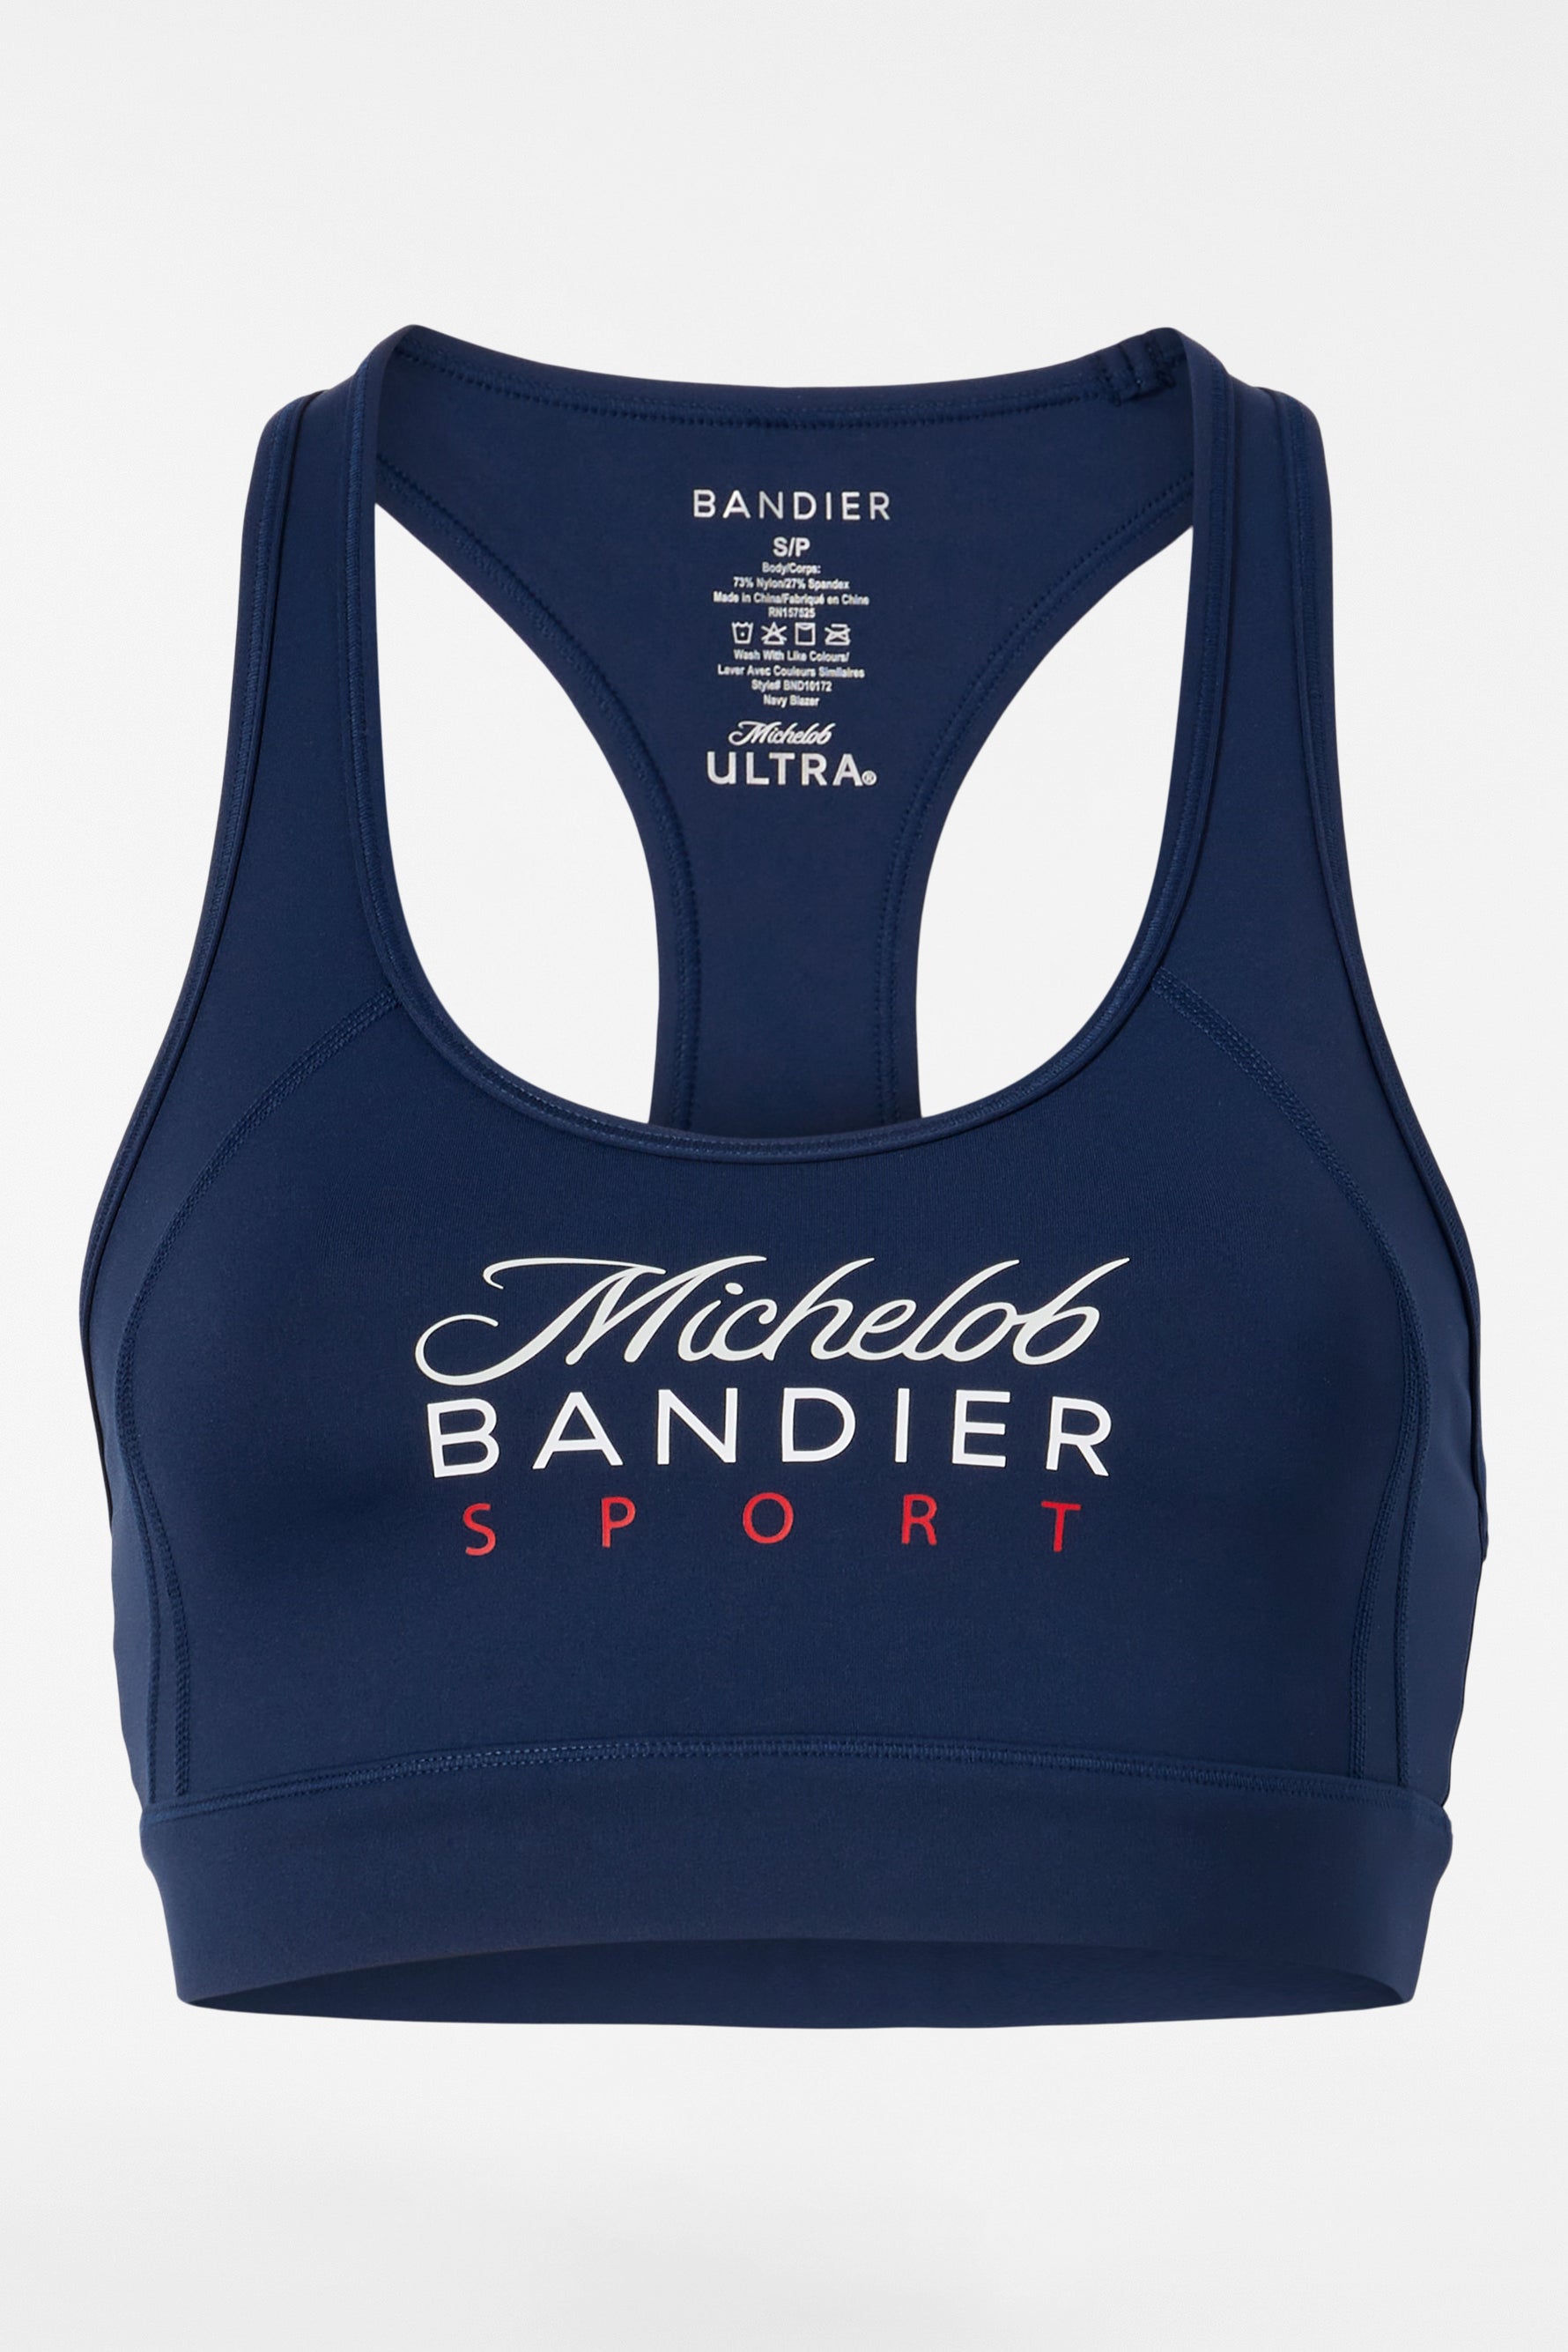 Front view of Michelob ULTRA x Bandier Center Stage Bra, Text "Michelob Bandier Sport" on center chest